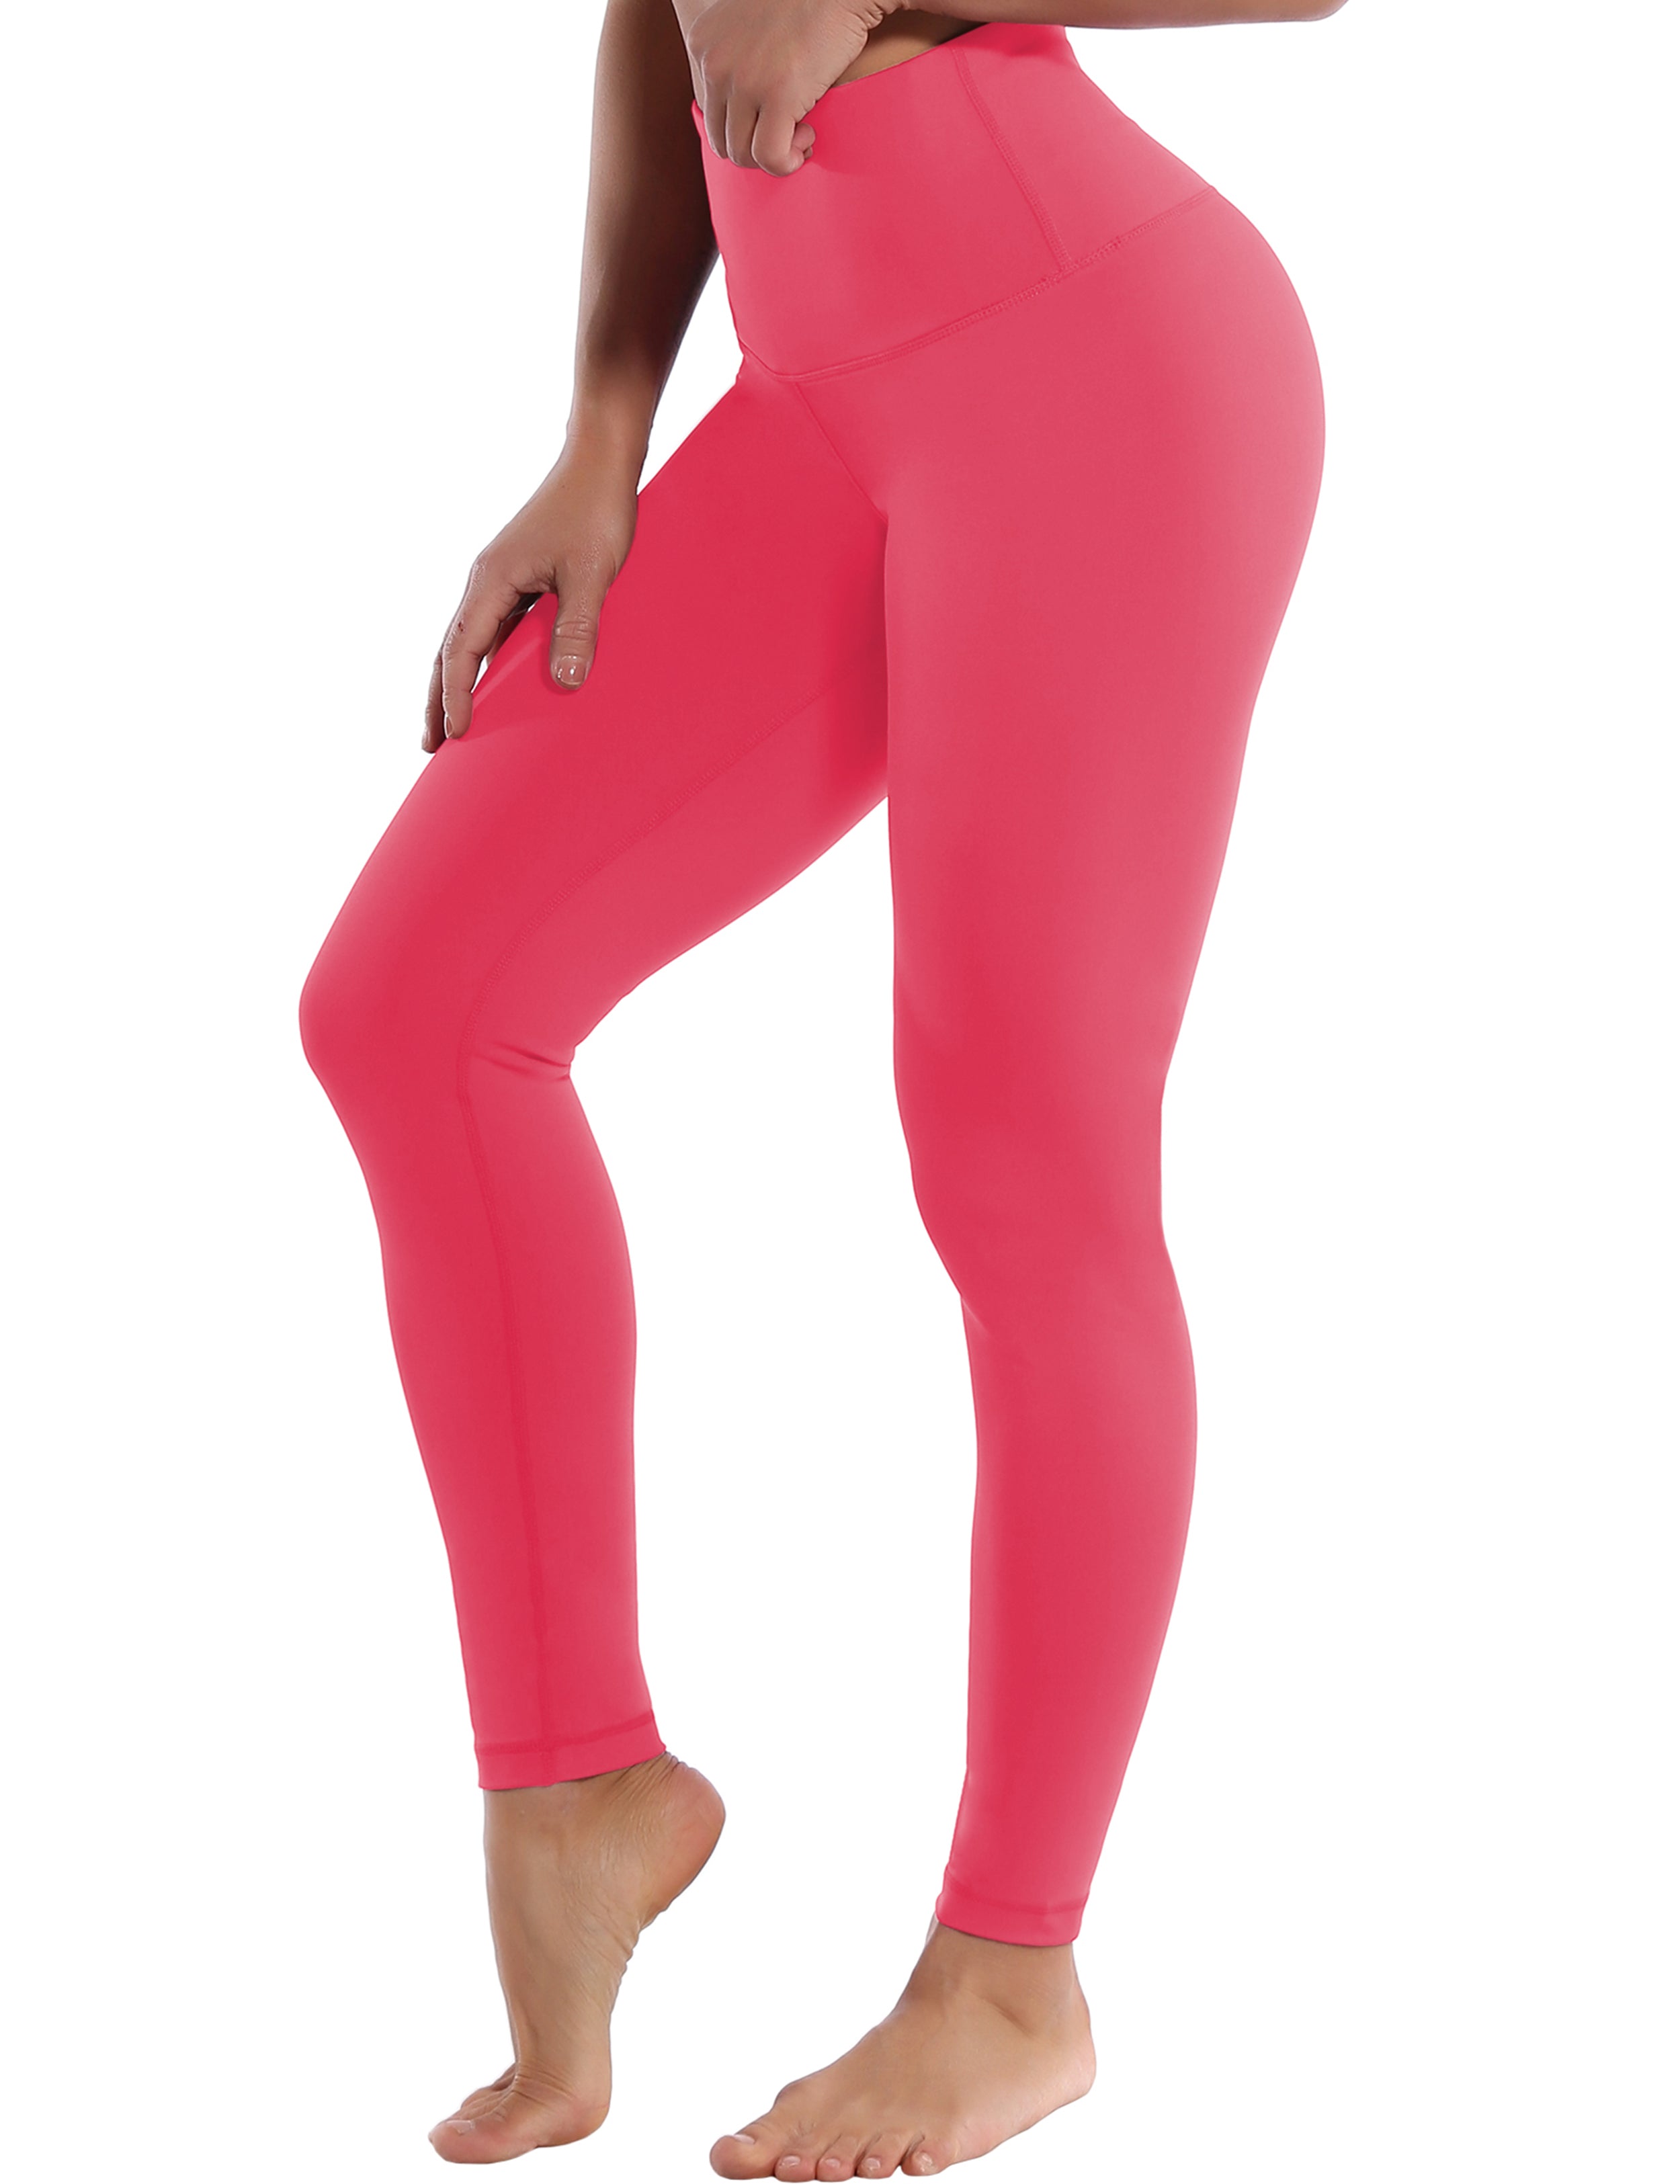 High Waist Gym Pants rosecoral 75%Nylon/25%Spandex Fabric doesn't attract lint easily 4-way stretch No see-through Moisture-wicking Tummy control Inner pocket Four lengths